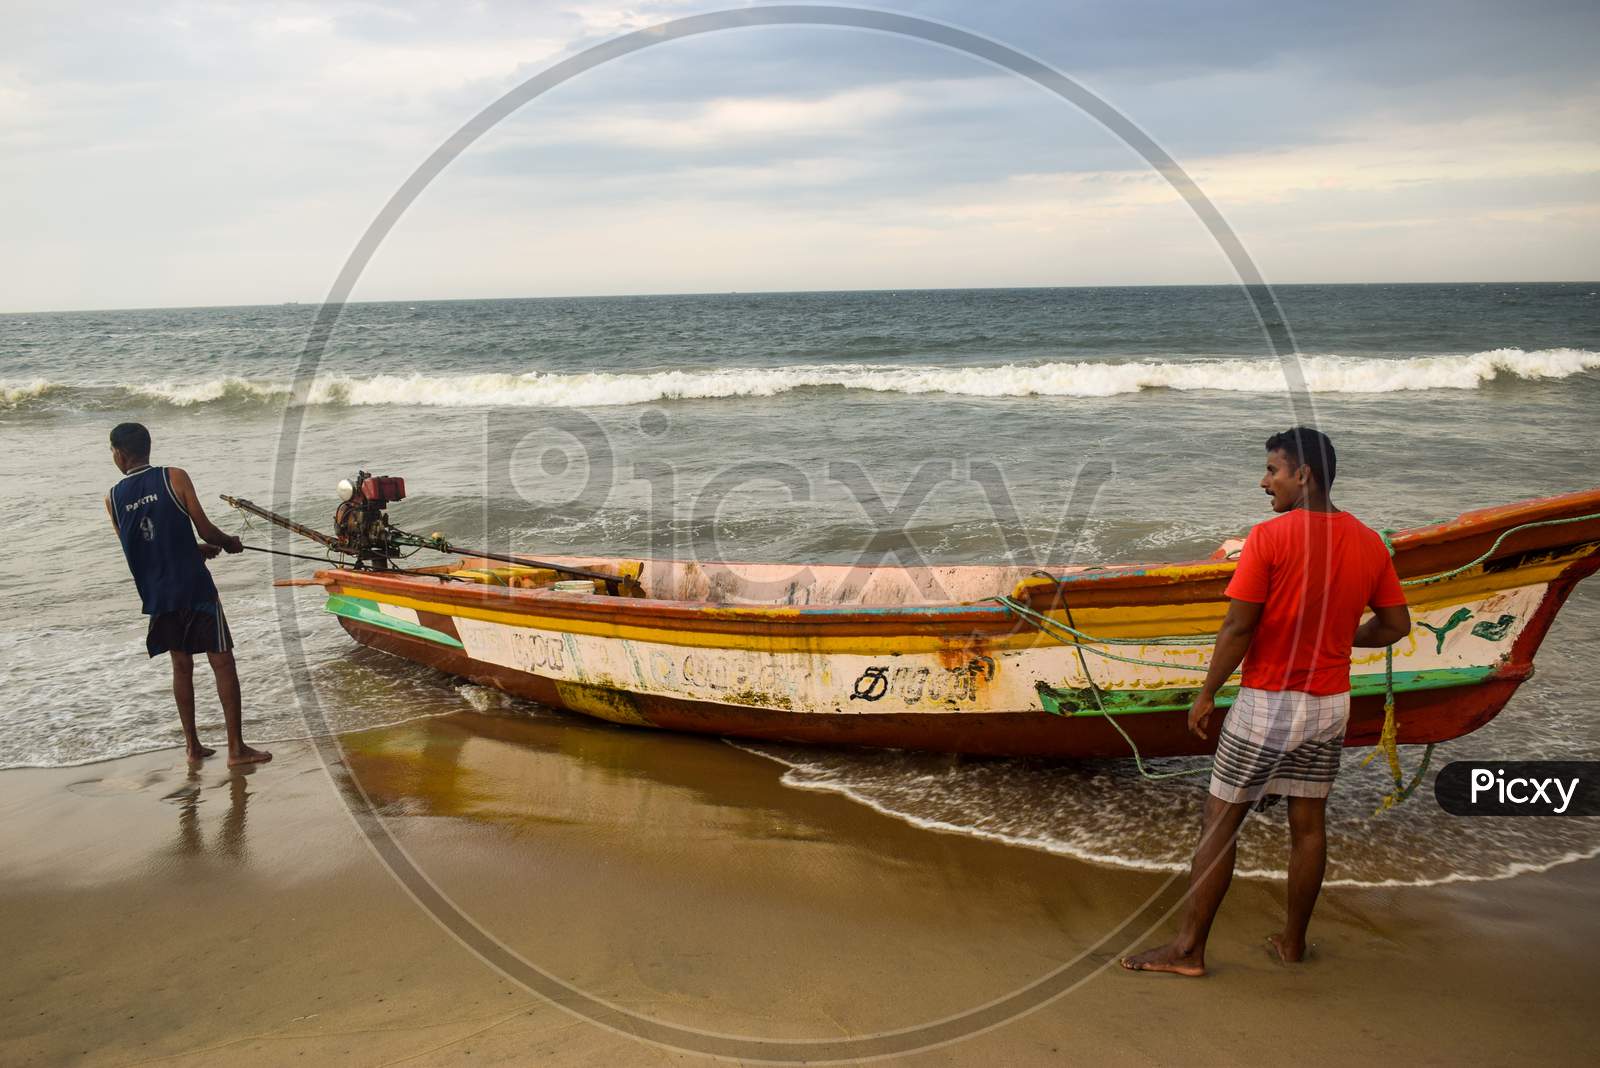 Pondicherry, Puducherry, Karnataka, 2019 : Fisherman pulling their boat out of water and cancelling their plan of fishing after high tide alert